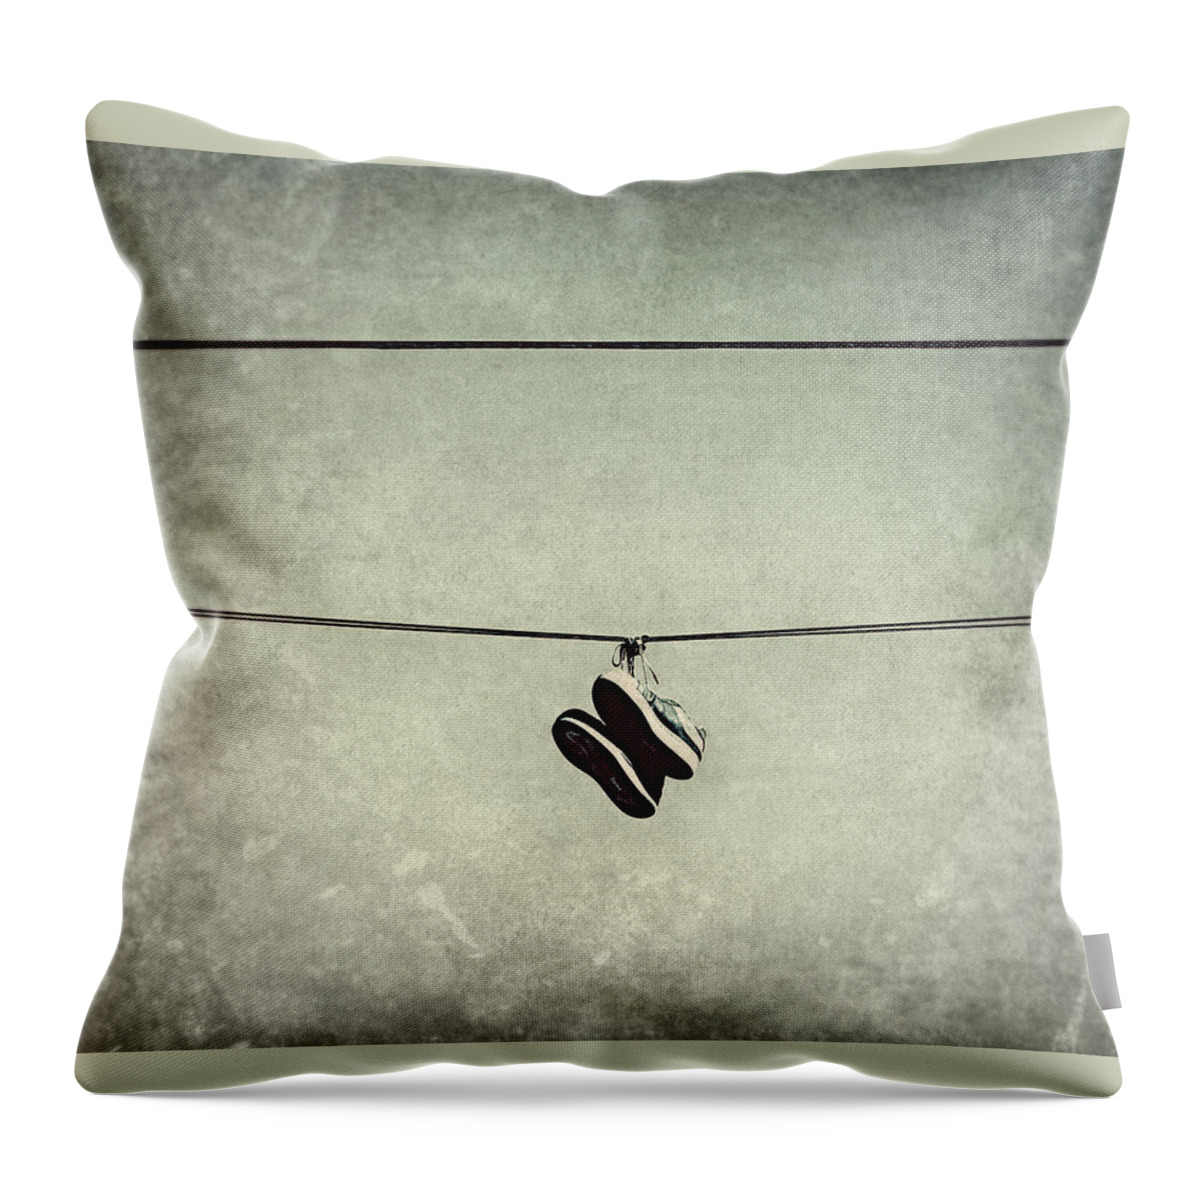 Shoes Throw Pillow featuring the photograph All Tied Up by Melanie Lankford Photography